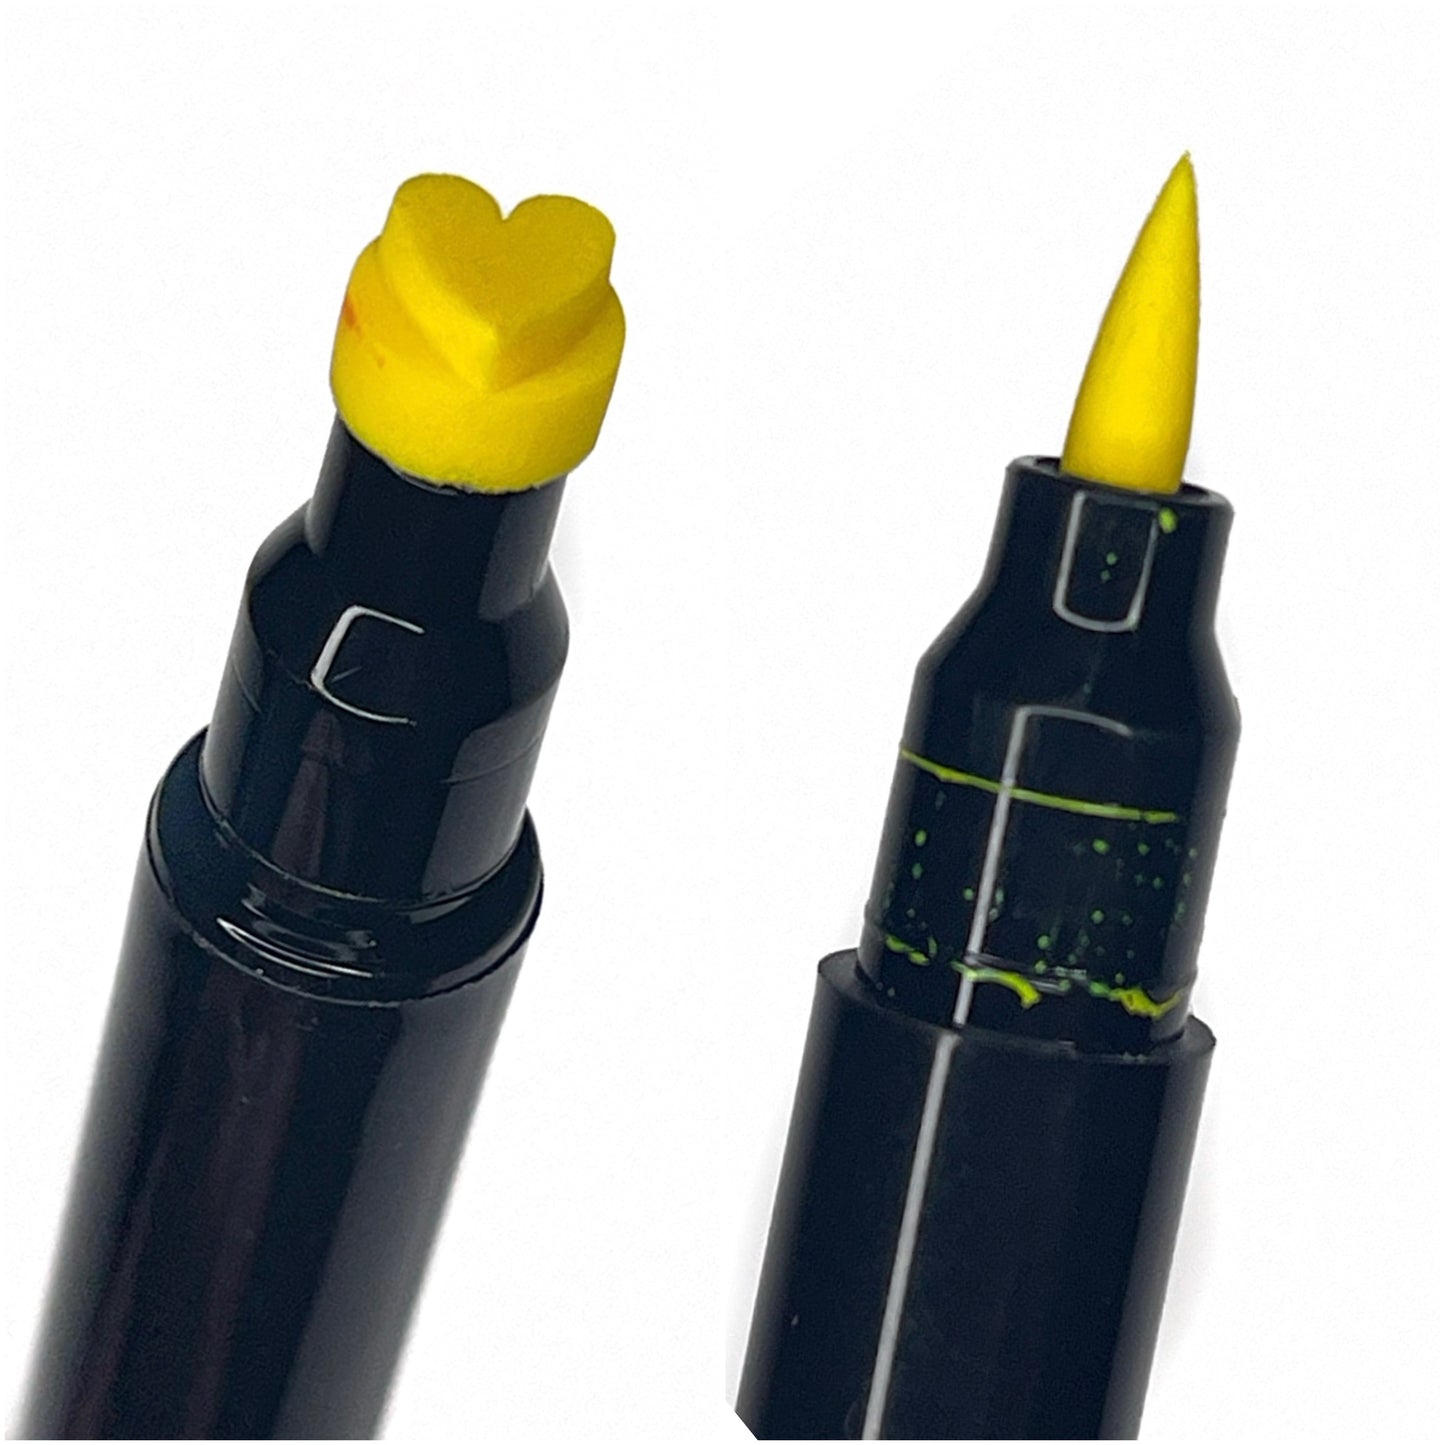 Super-Stay Stamp Liner "Yellow Heart"